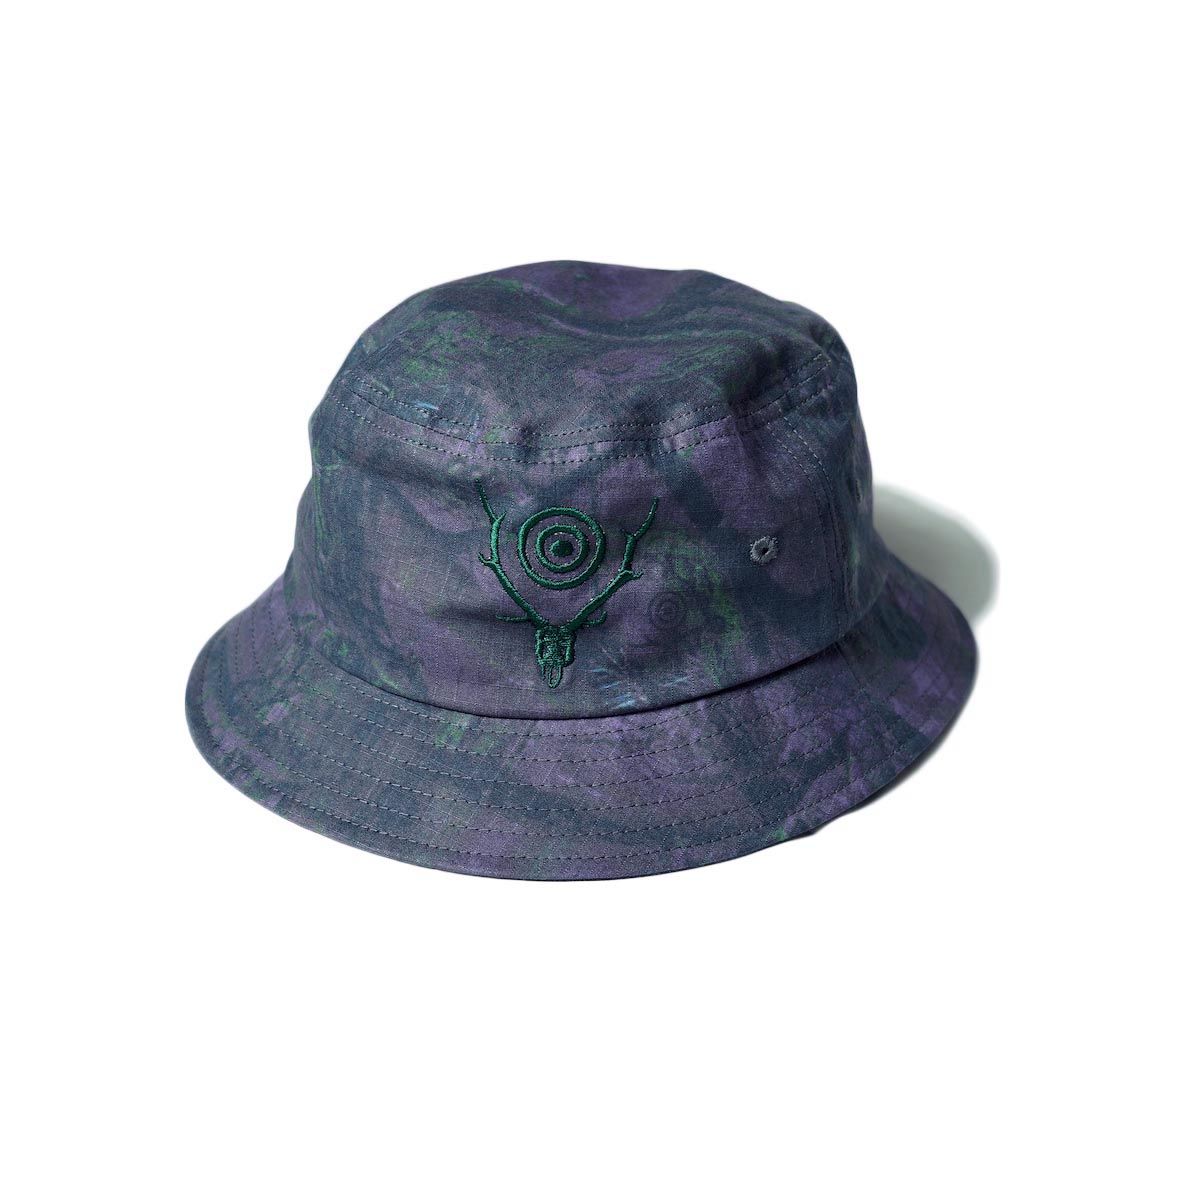 South2 West8 / BUCKET HAT - COTTON RIPSTOP / S2W8 CAMO (gray)